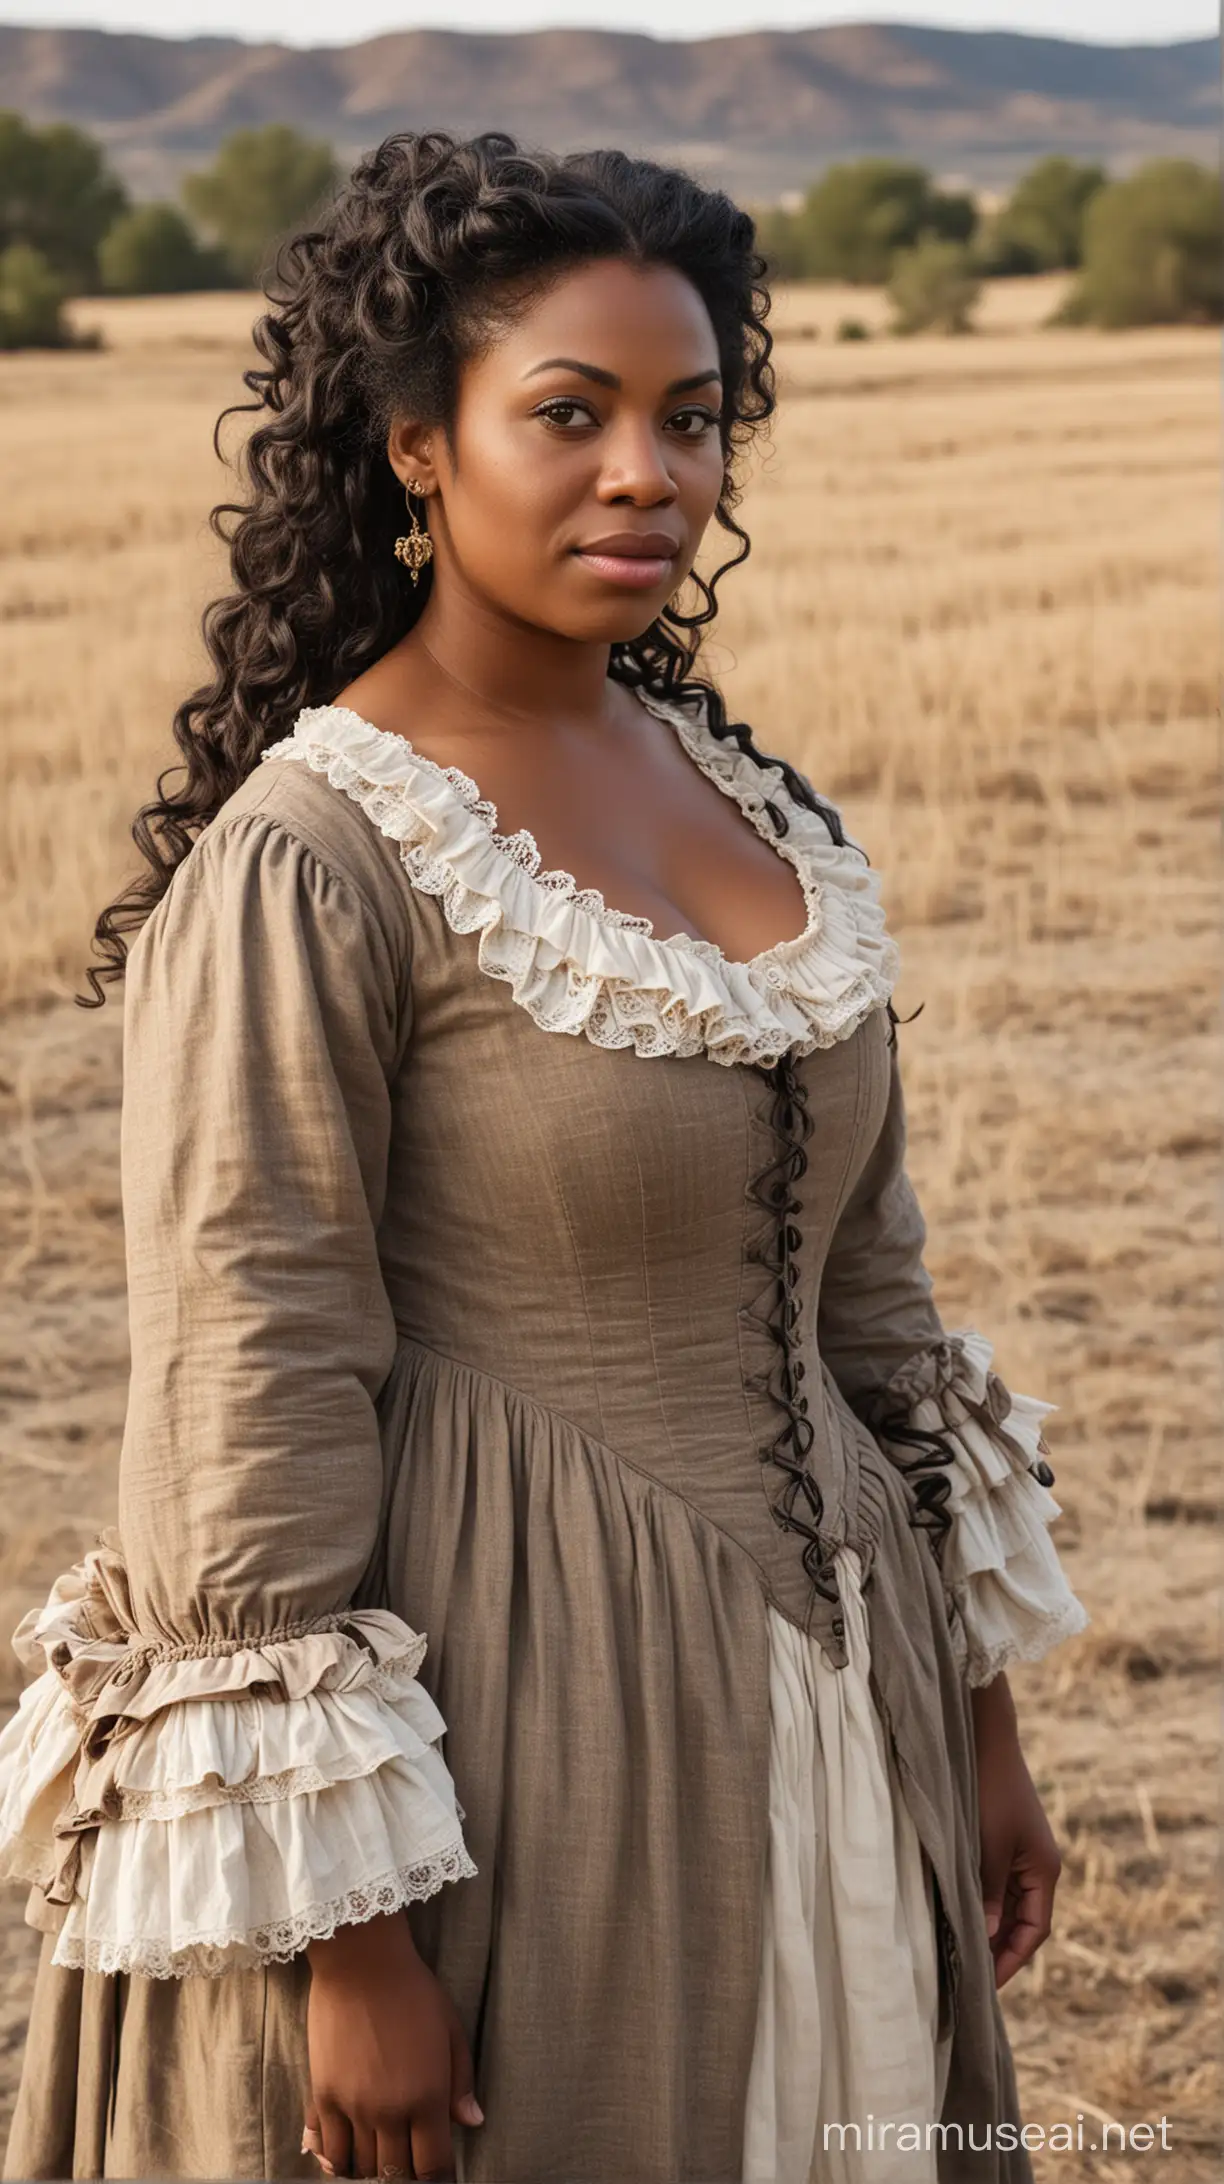 Portrait of a Plump African American Woman in 18th Century Attire